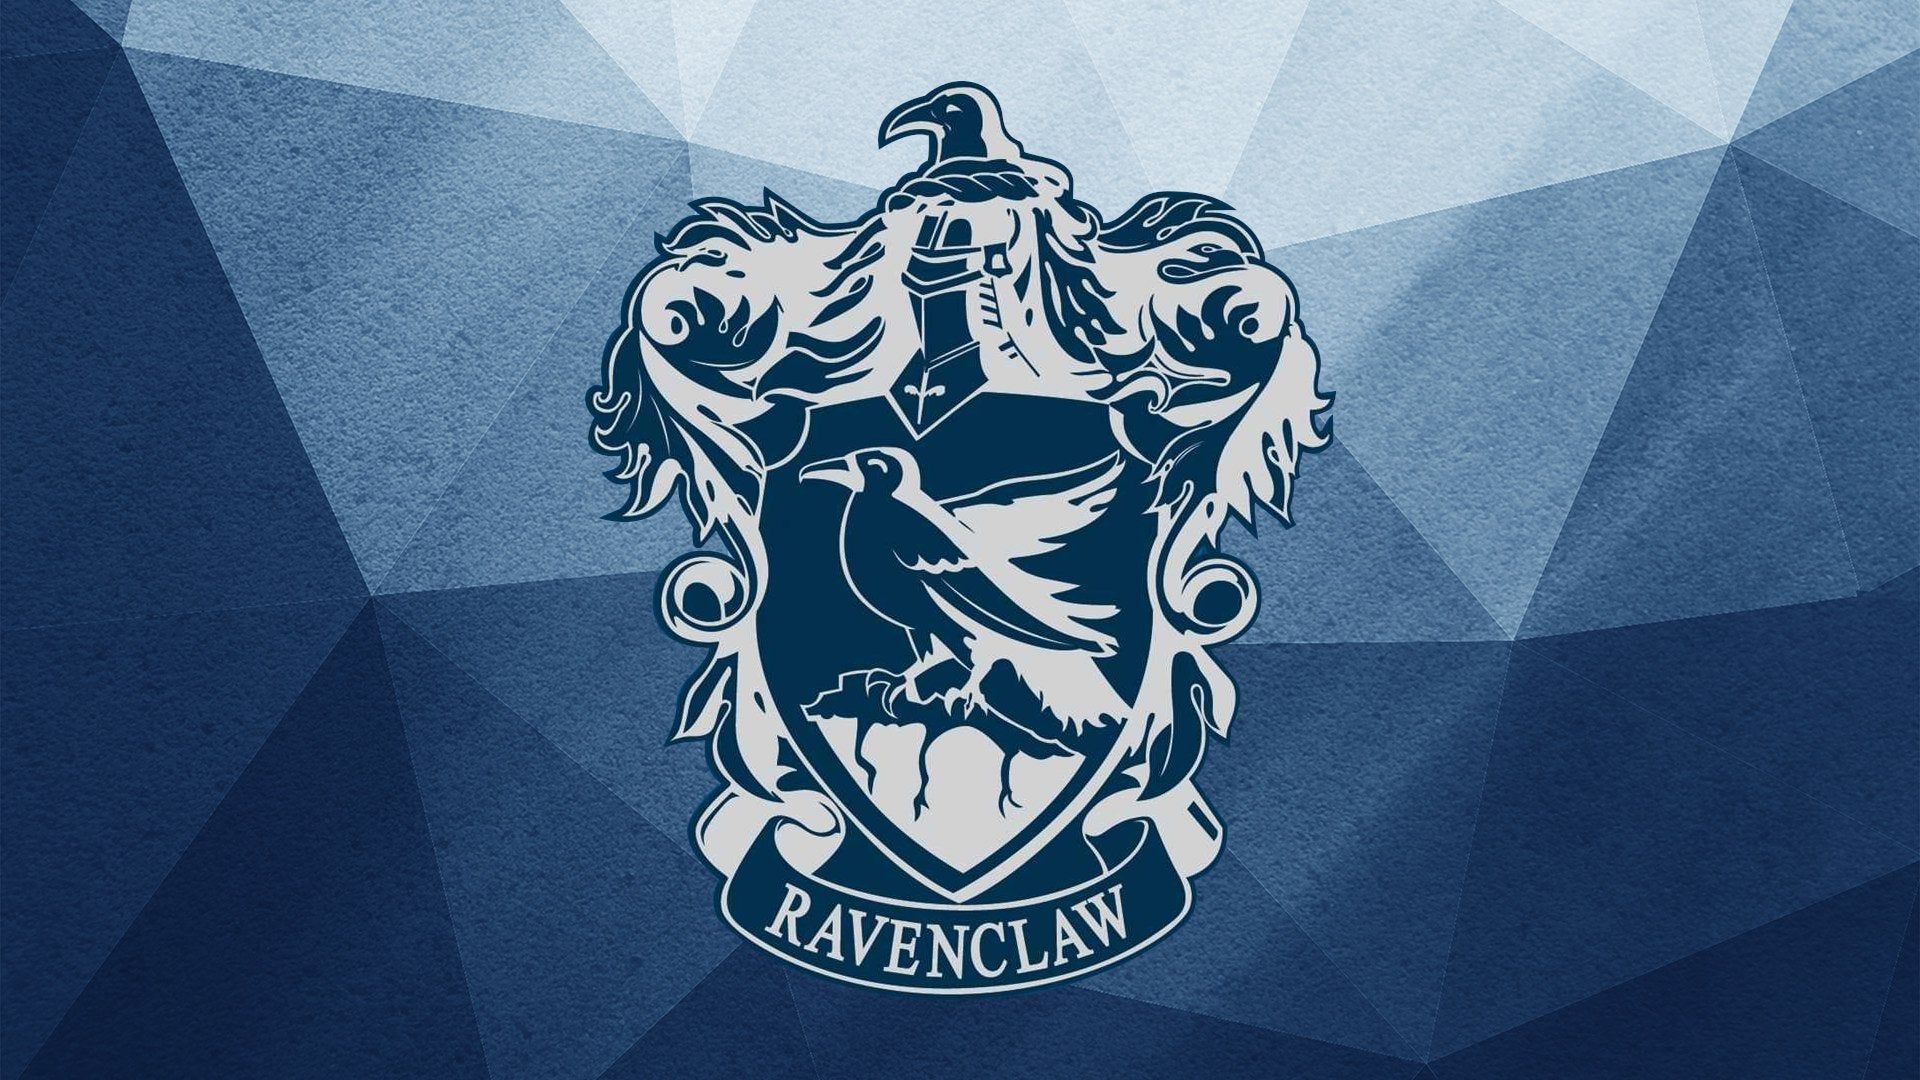 Couldn't find a ravenclaw wallpaper i liked so i threw one. Harry potter wallpaper phone, Harry potter wallpaper, Harry potter iphone wallpaper